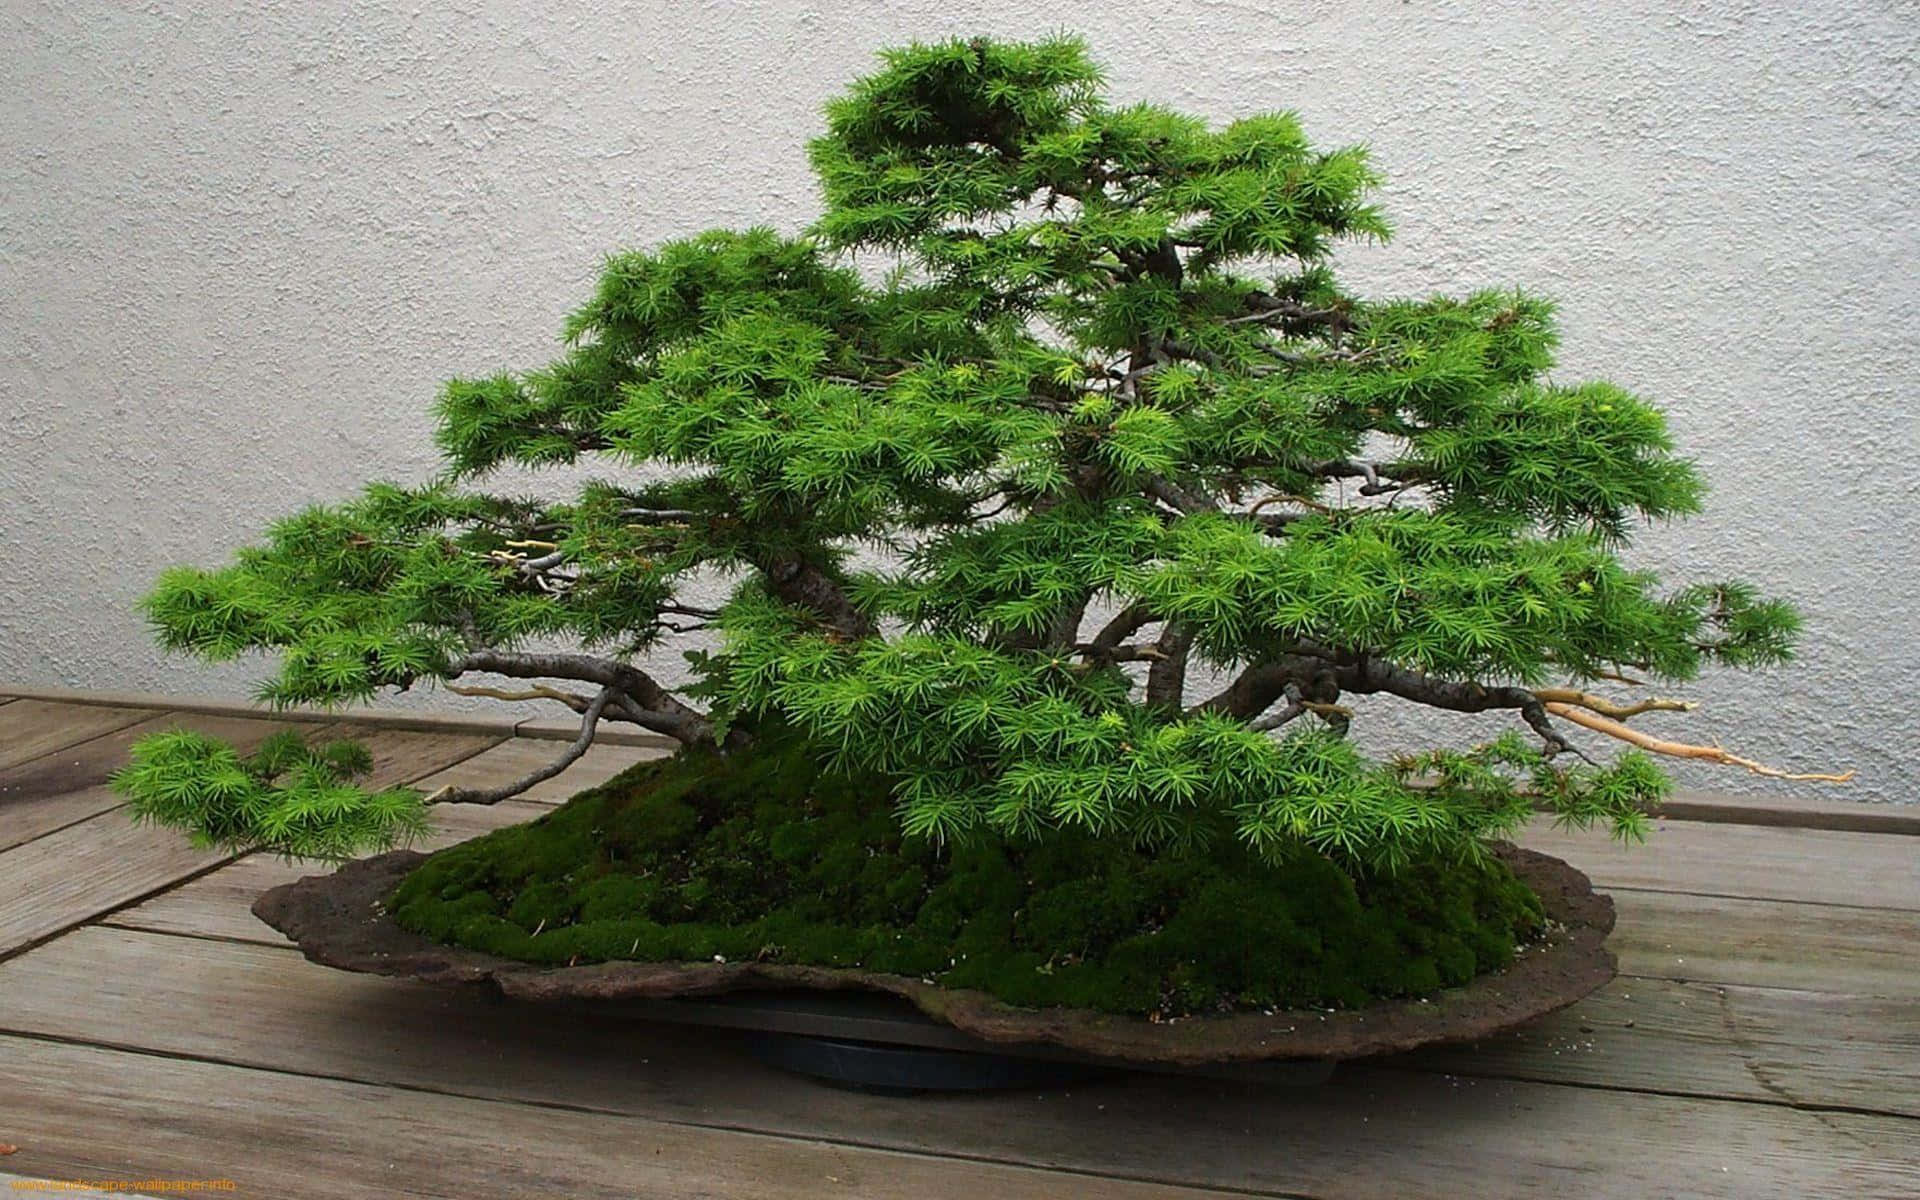 Enjoying the Beauty of Nature with Two Bonsai Trees